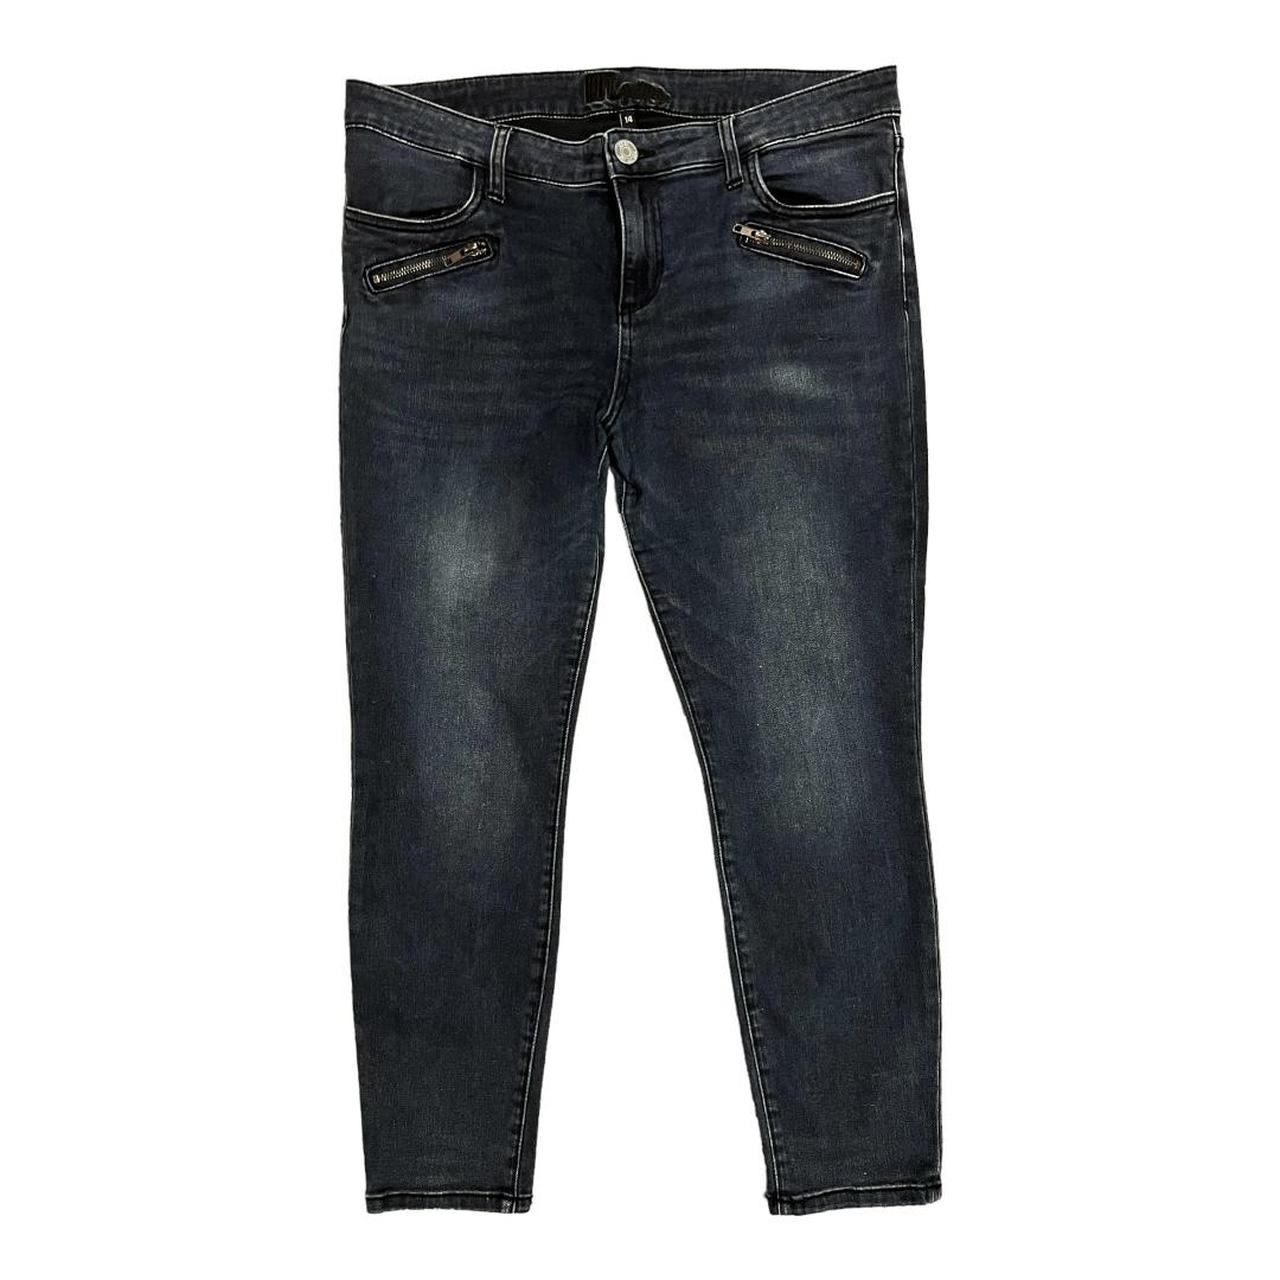 Kut from the Kloth Women's Navy and Blue Jeans (3)